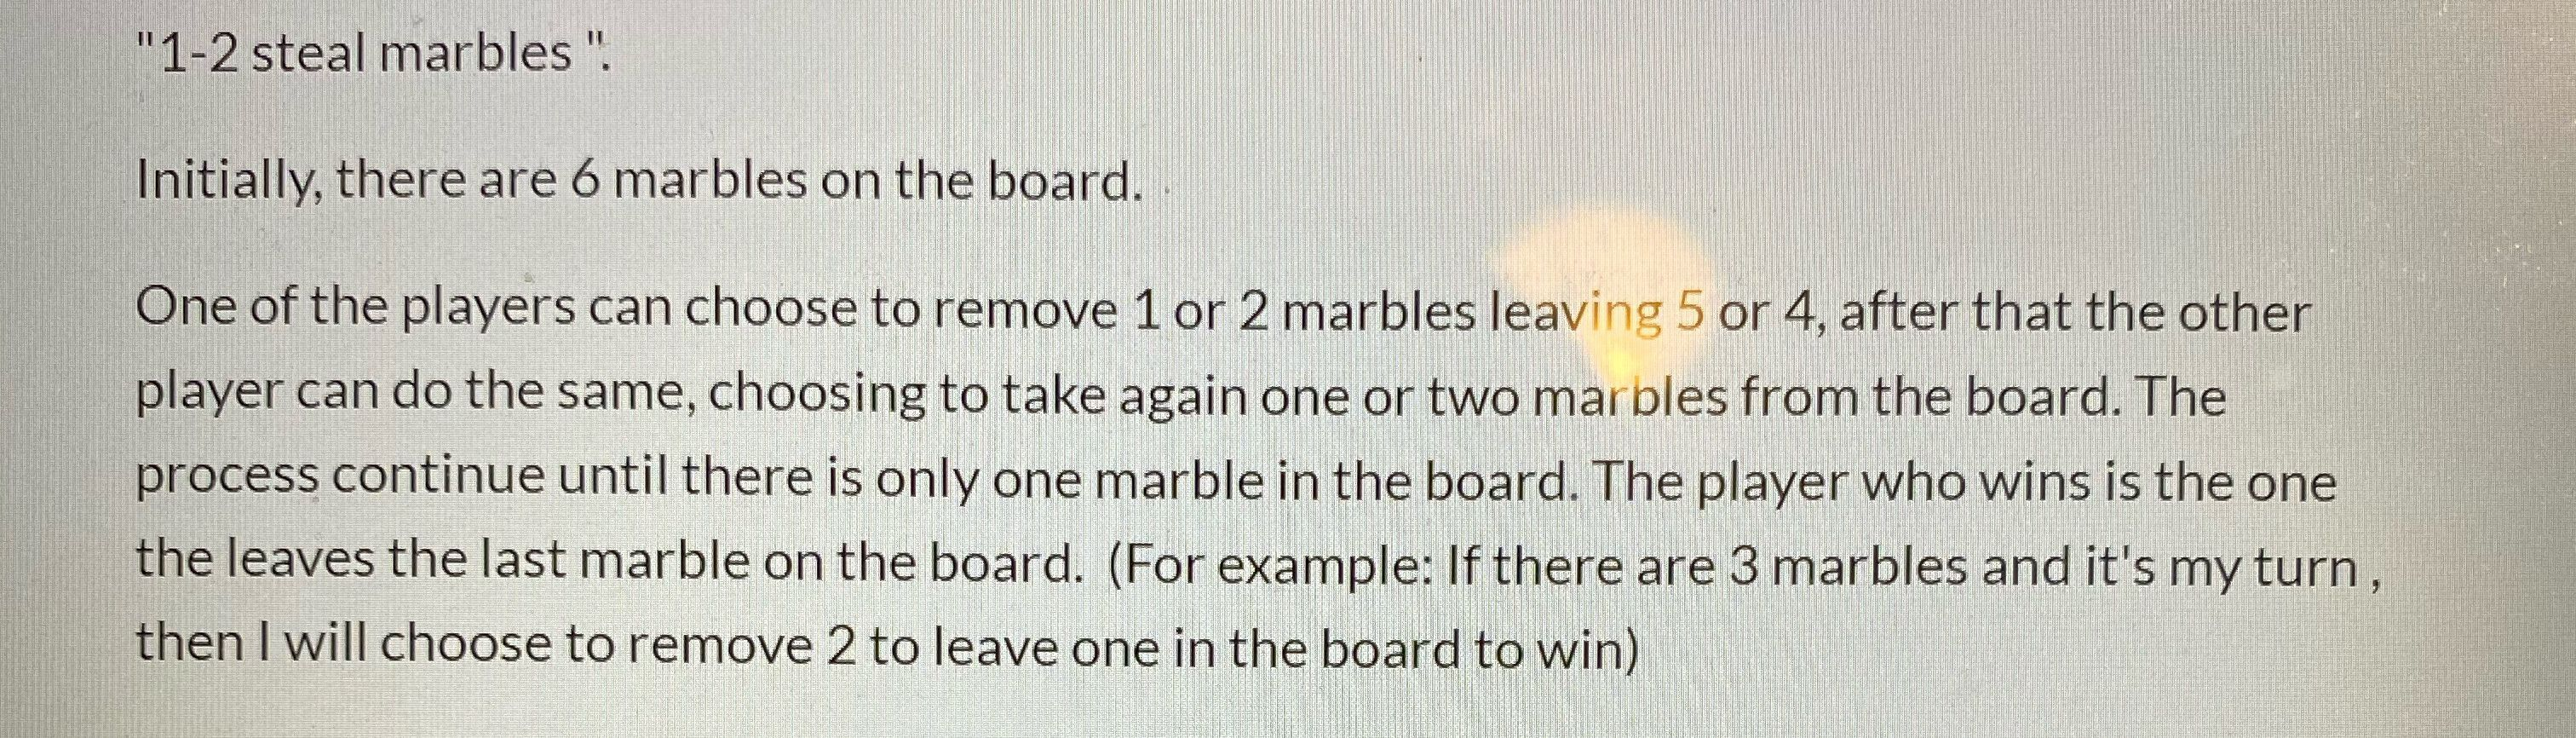 "1-2 steal marbles ".
Initially, there are 6 marbles on the board.
One of the players can choose to remove 1 or 2 marbles leaving 5 or 4, after that the other
player can do the same, choosing to take again one or two marbles from the board. The
process continue until there is only one marble in the board. The player who wins is the one
the leaves the last marble on the board. (For example: If there are 3 marbles and it's my turn,
then I will choose to remove 2 to leave one in the board to win)
